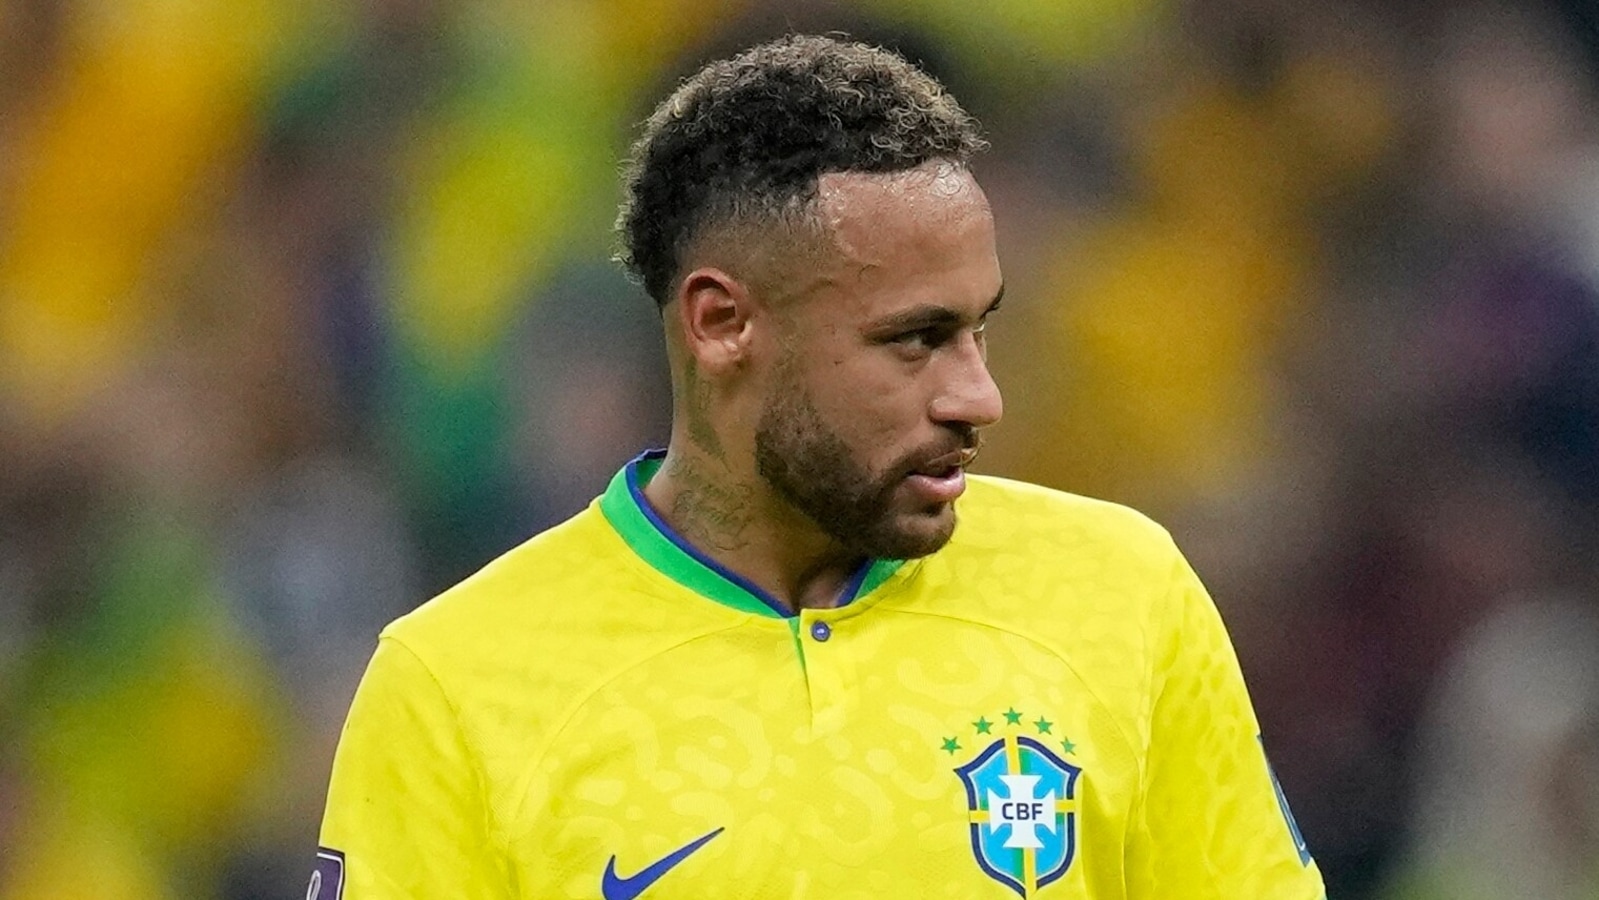 Brazil World Cup 2014 Trendsetting Hairstyles | Neymar hairstyles | Neymar  jr hairstyle, Hairstyle neymar, Hair styles